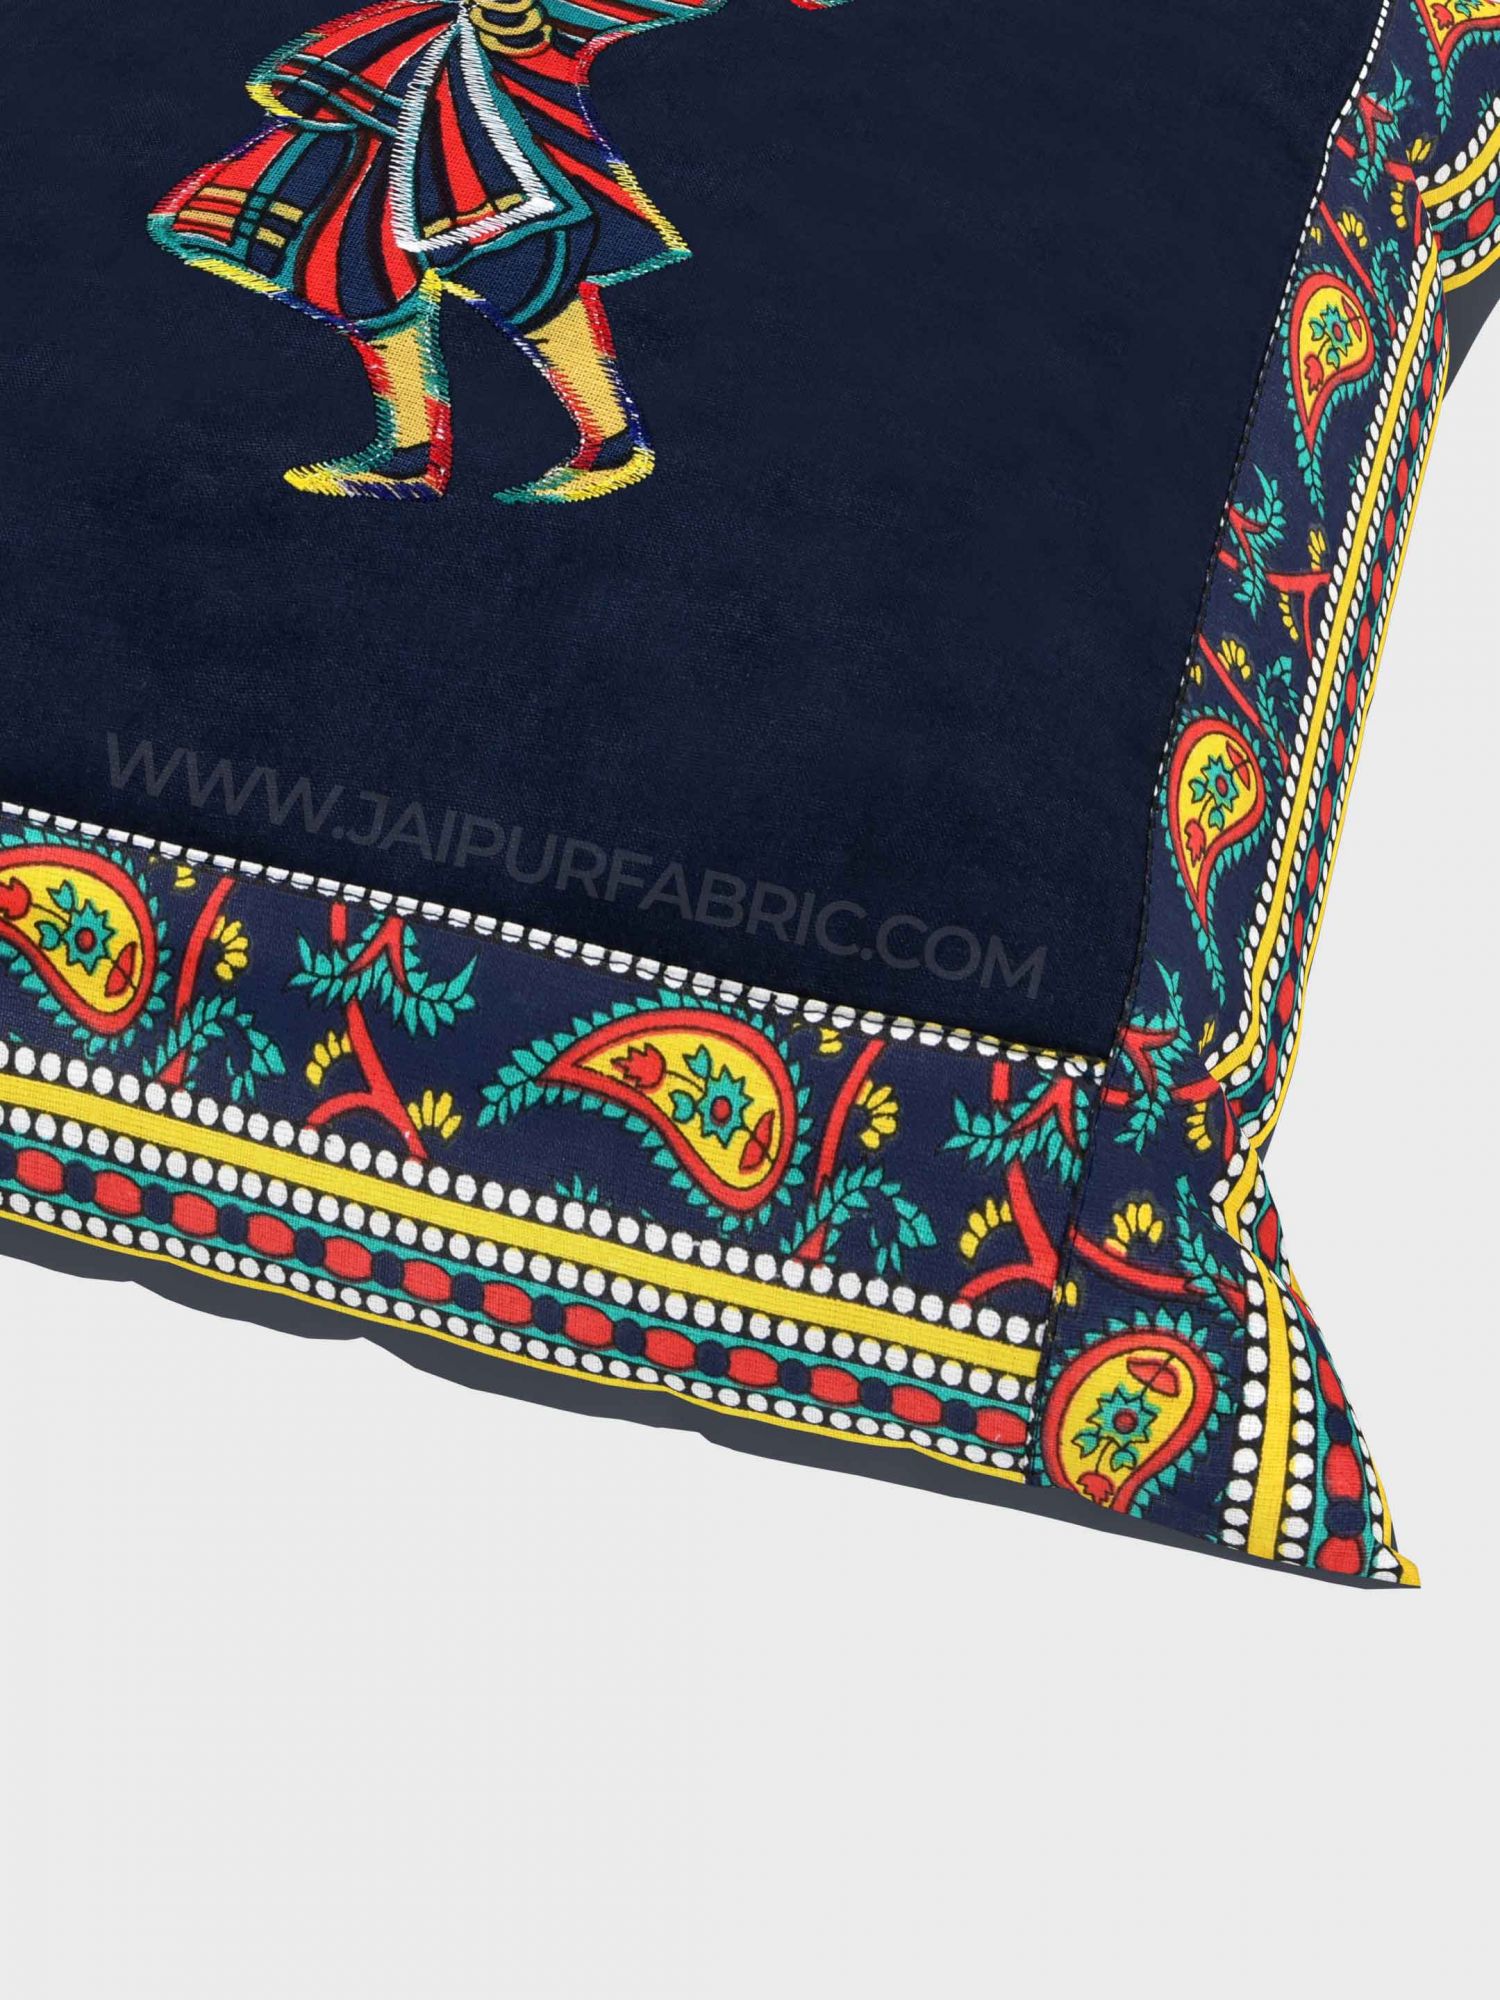 Applique Blue Chang Dance Jaipuri Hand Made Embroidery Patch Work Cushion Cover